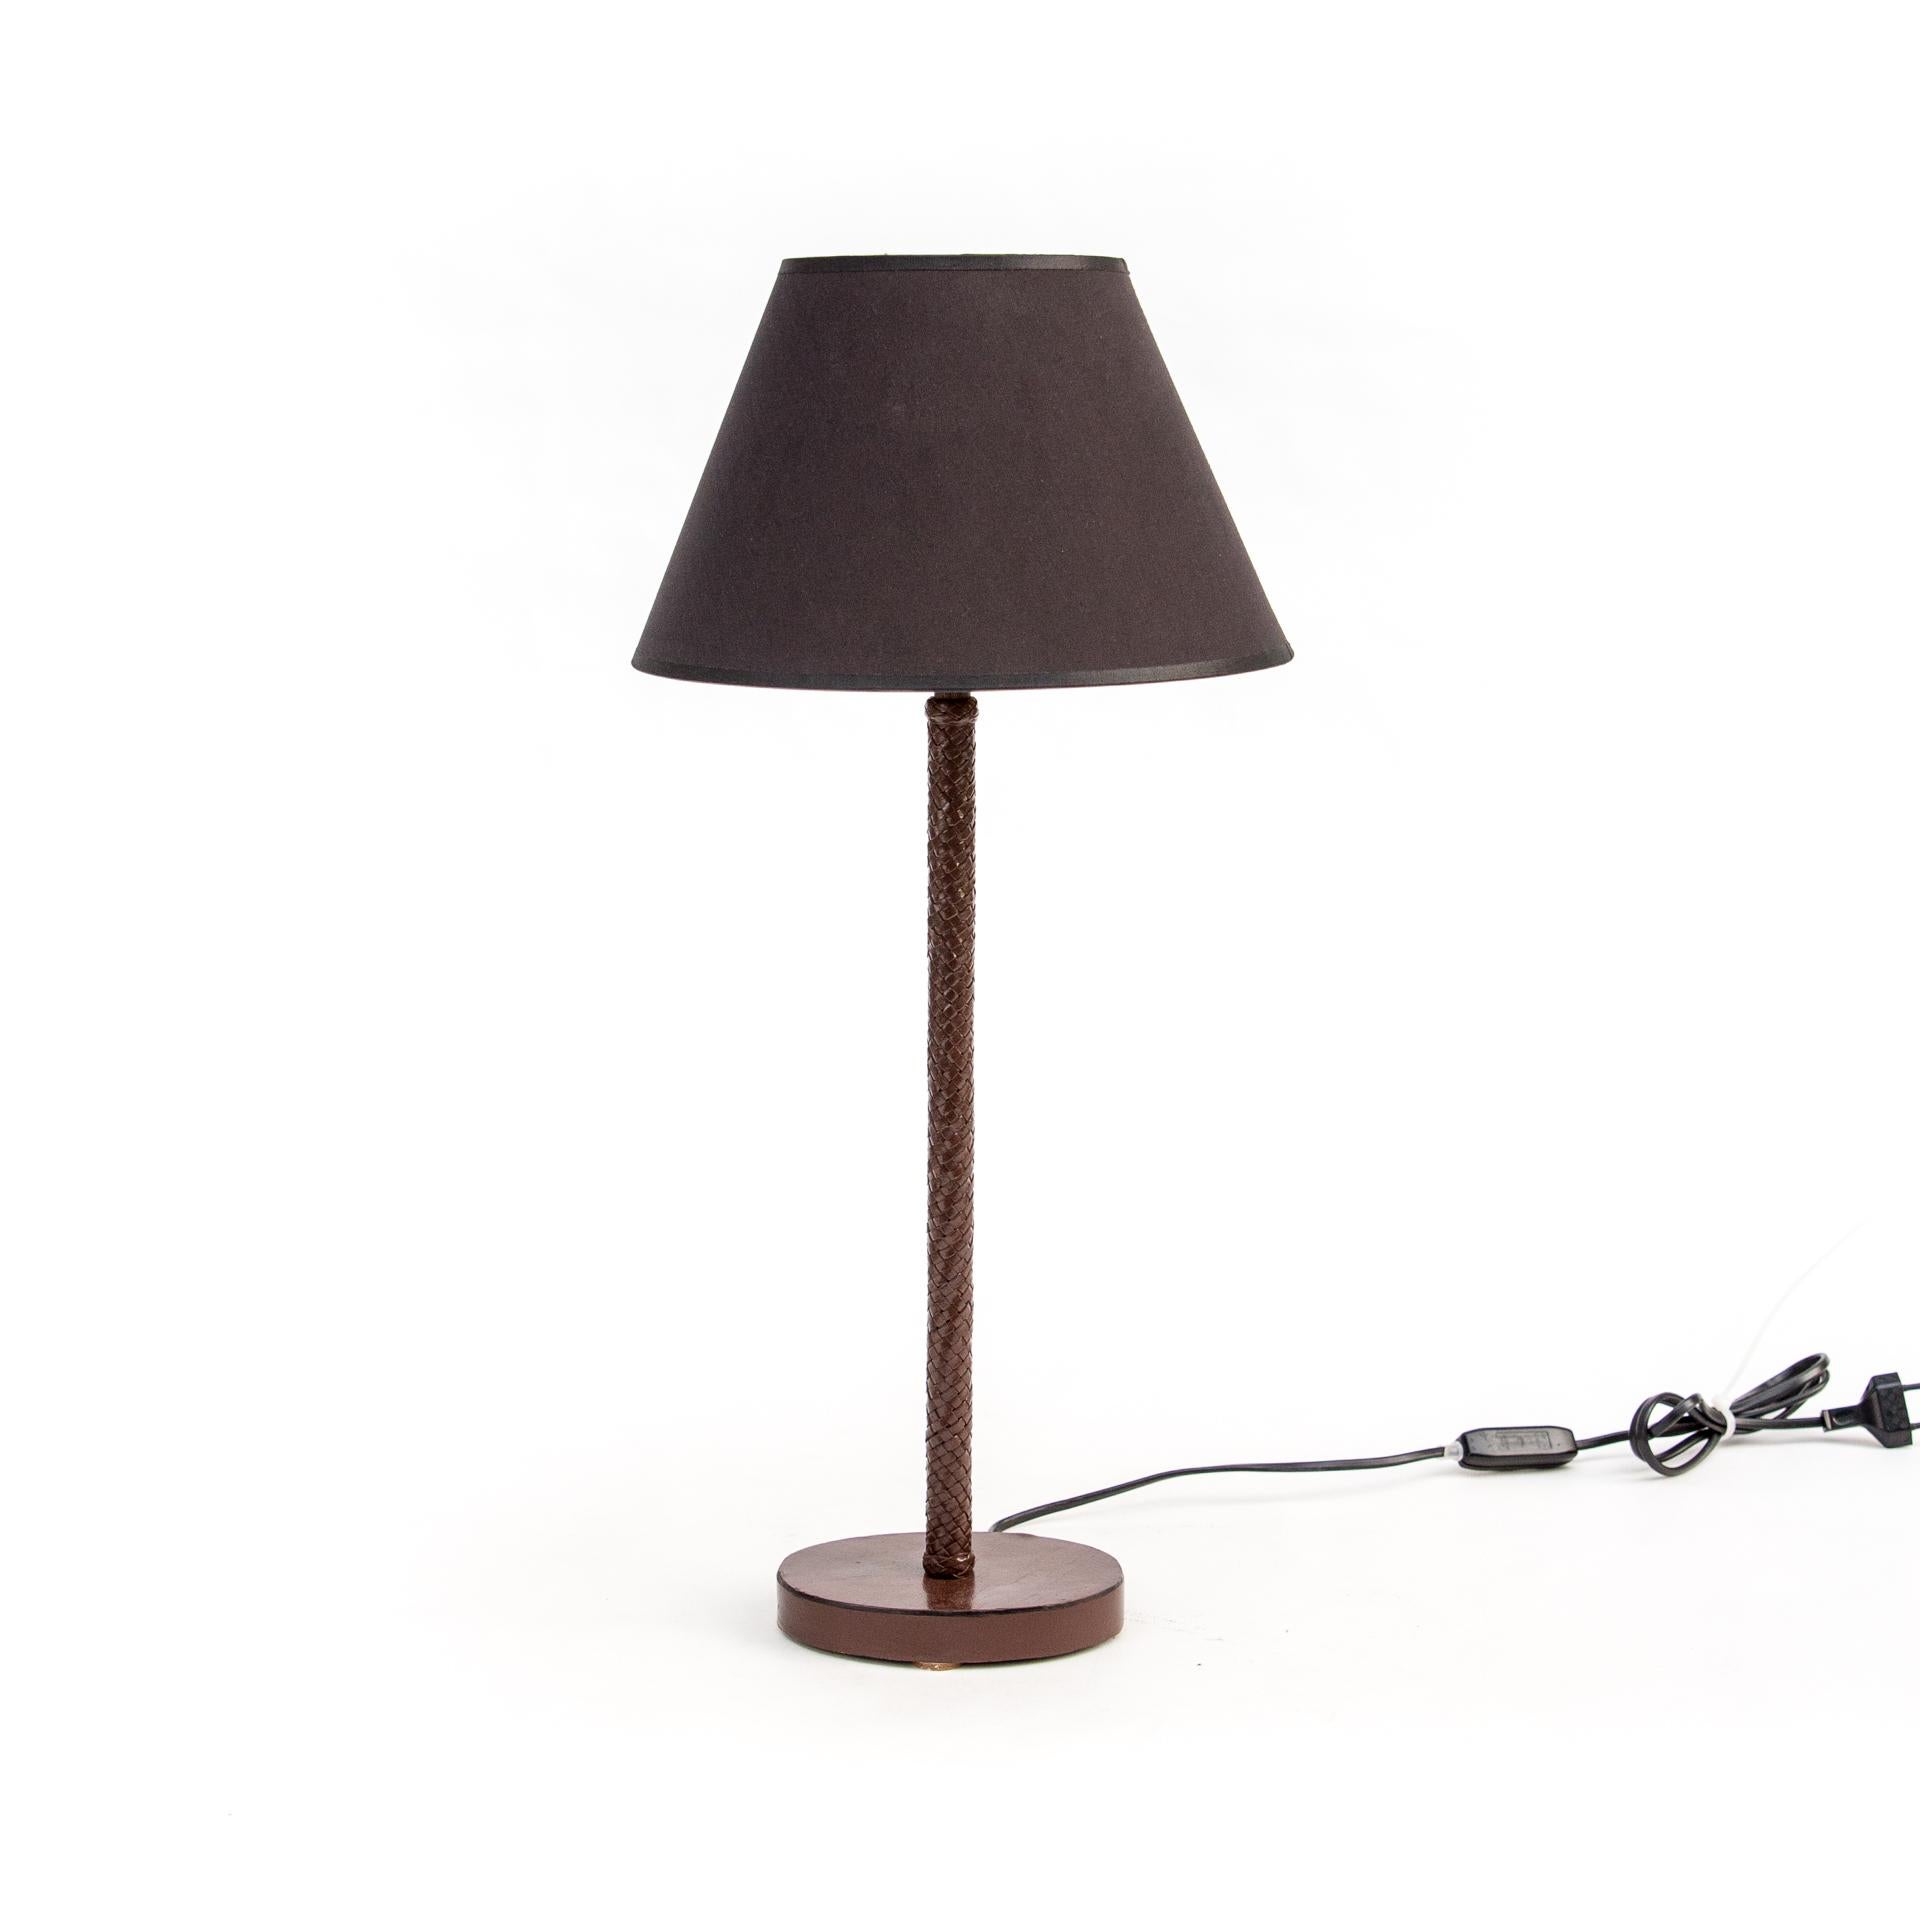 A pair of Bottega Veneta lamps with leather braid. Made in precise and time-consuming technique, which makes this brand recognizable.

The lamps have a reduced, Minimalist form. Straight, thin stems are placed on oval, small and low bases. Black